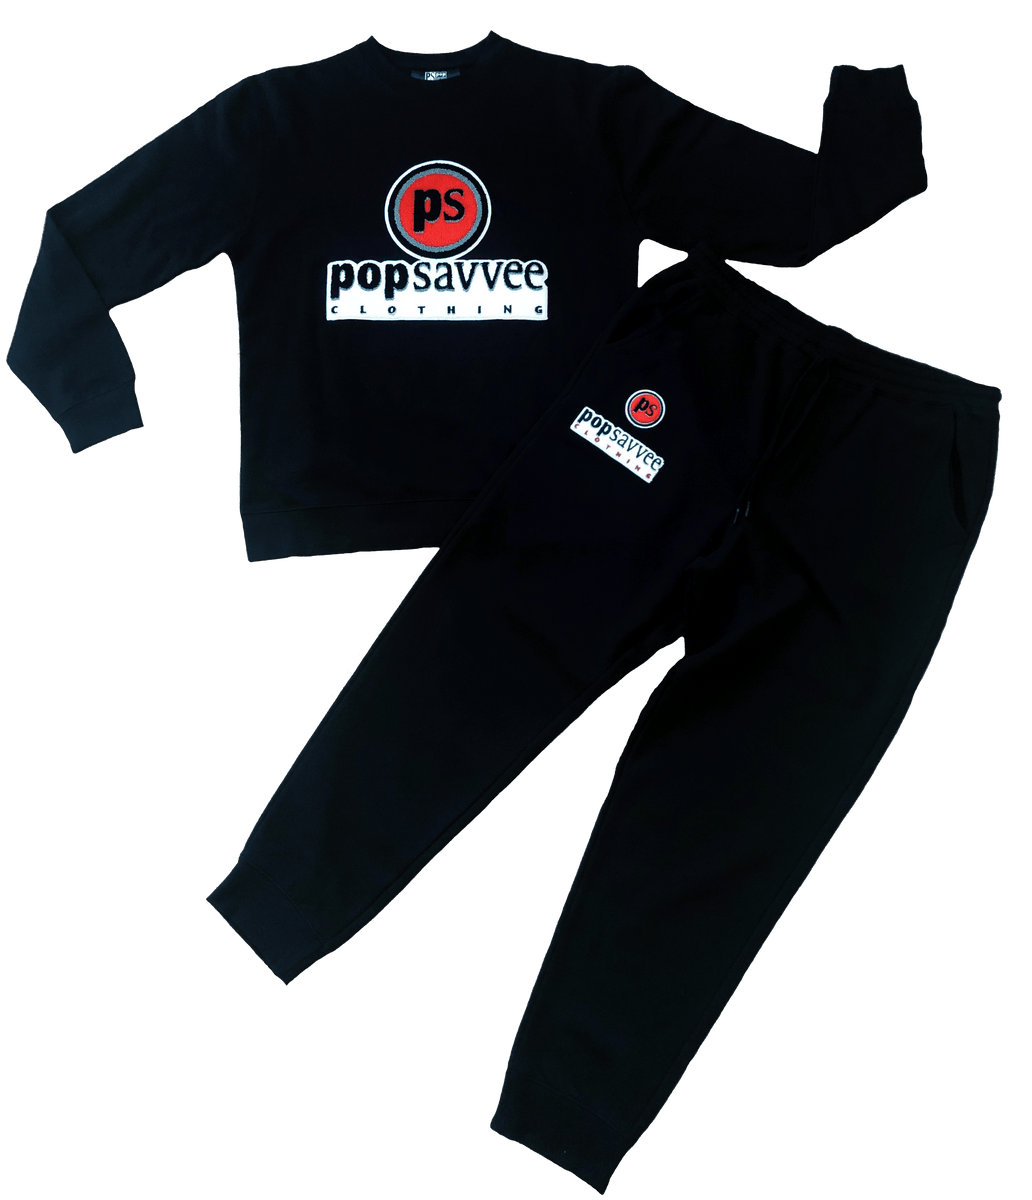 Black Sweat Suit - Chenille Embroidered “Pop Savvee Clothing” Logo